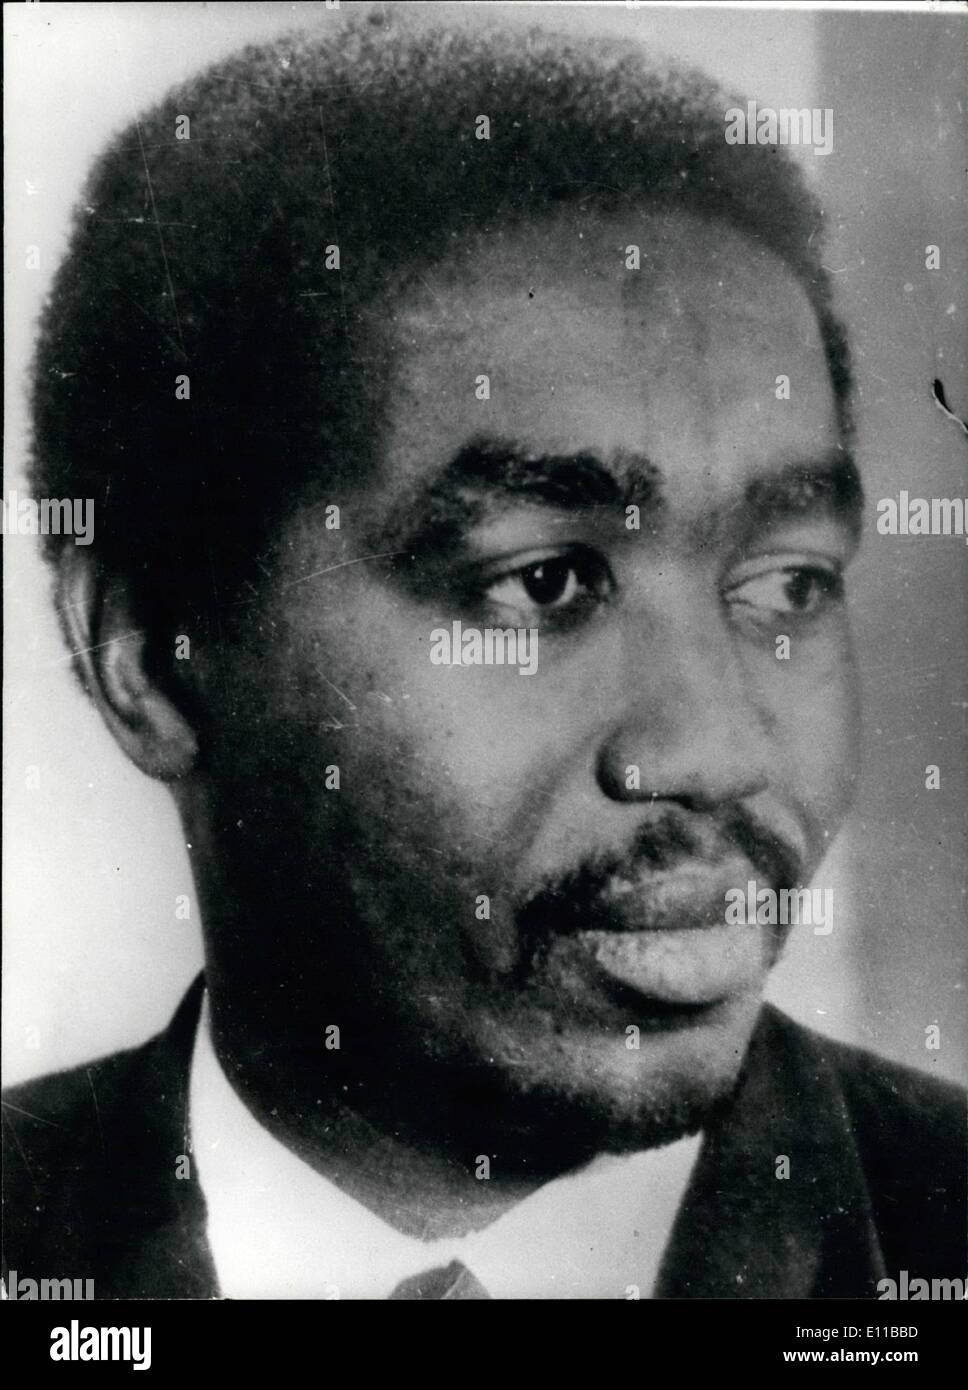 Jul. 07, 1976 - Coup against President Numeiri fails in Sudan: President Numeiri of Sudan survived the second serious military revolt against his regime earlier this month. Forces loyal to the President put down the rebellion after some heavy fighting. One of the leaders of the obortive coup, Brigadier Muhammad Nur Saad, has been arrested and now awaits a court martial. Photo shows Brigadier Muhammad Nur Saad, one of the leaders of the revolt, who is now awaiting trial. Stock Photo